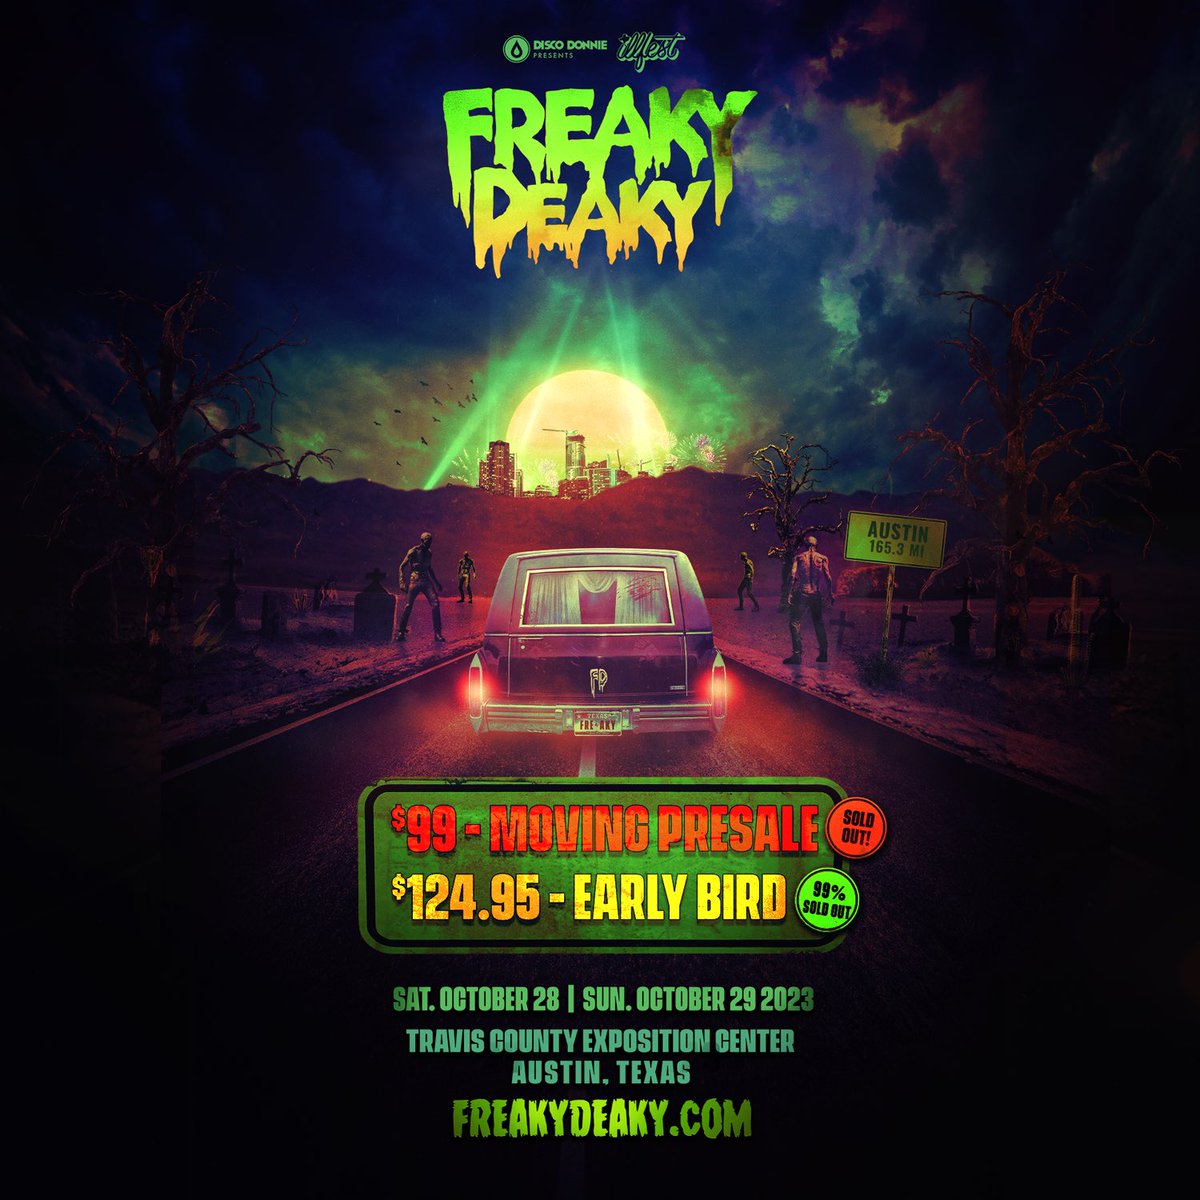 It’s about that time freaks! 🎃 Tickets for @FreakyDeakyTX are now on sale! Join us as we take over Austin, TX for two days of spooky beats & vibes 🌀 Promo Code - TEXASEDM 👻 Link in bio! #freakydeaky #freakydeakytx #texasedm